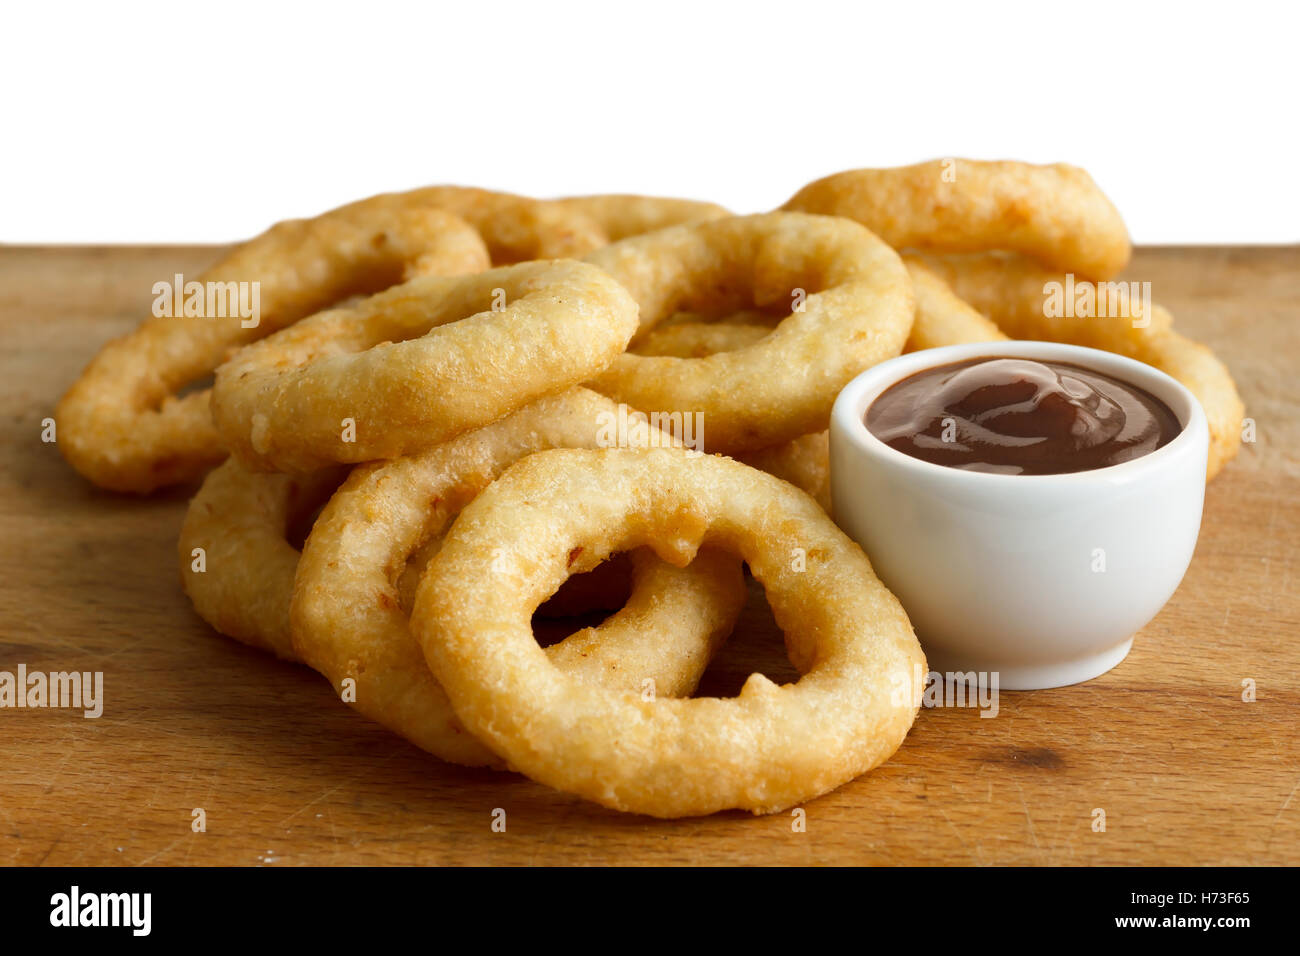 Heap of deep fried onion or calamari rings with barbecue dip on wood board. Stock Photo